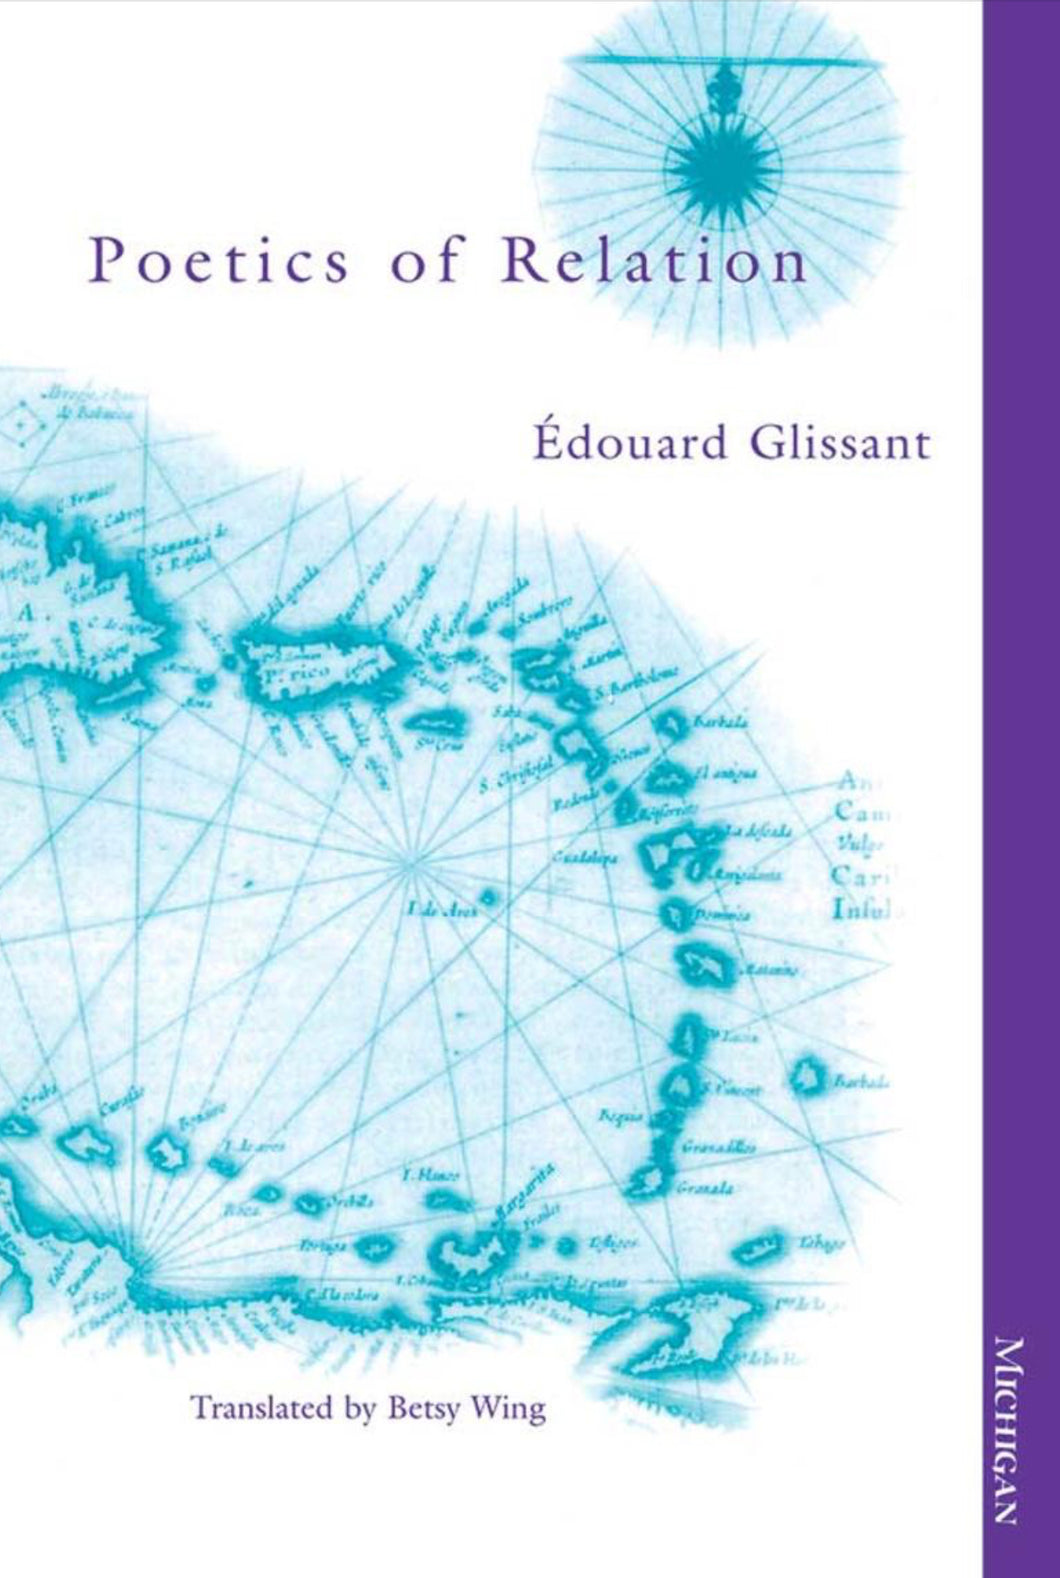 Basket Books: “poetics of relation” by Édouard Glissent